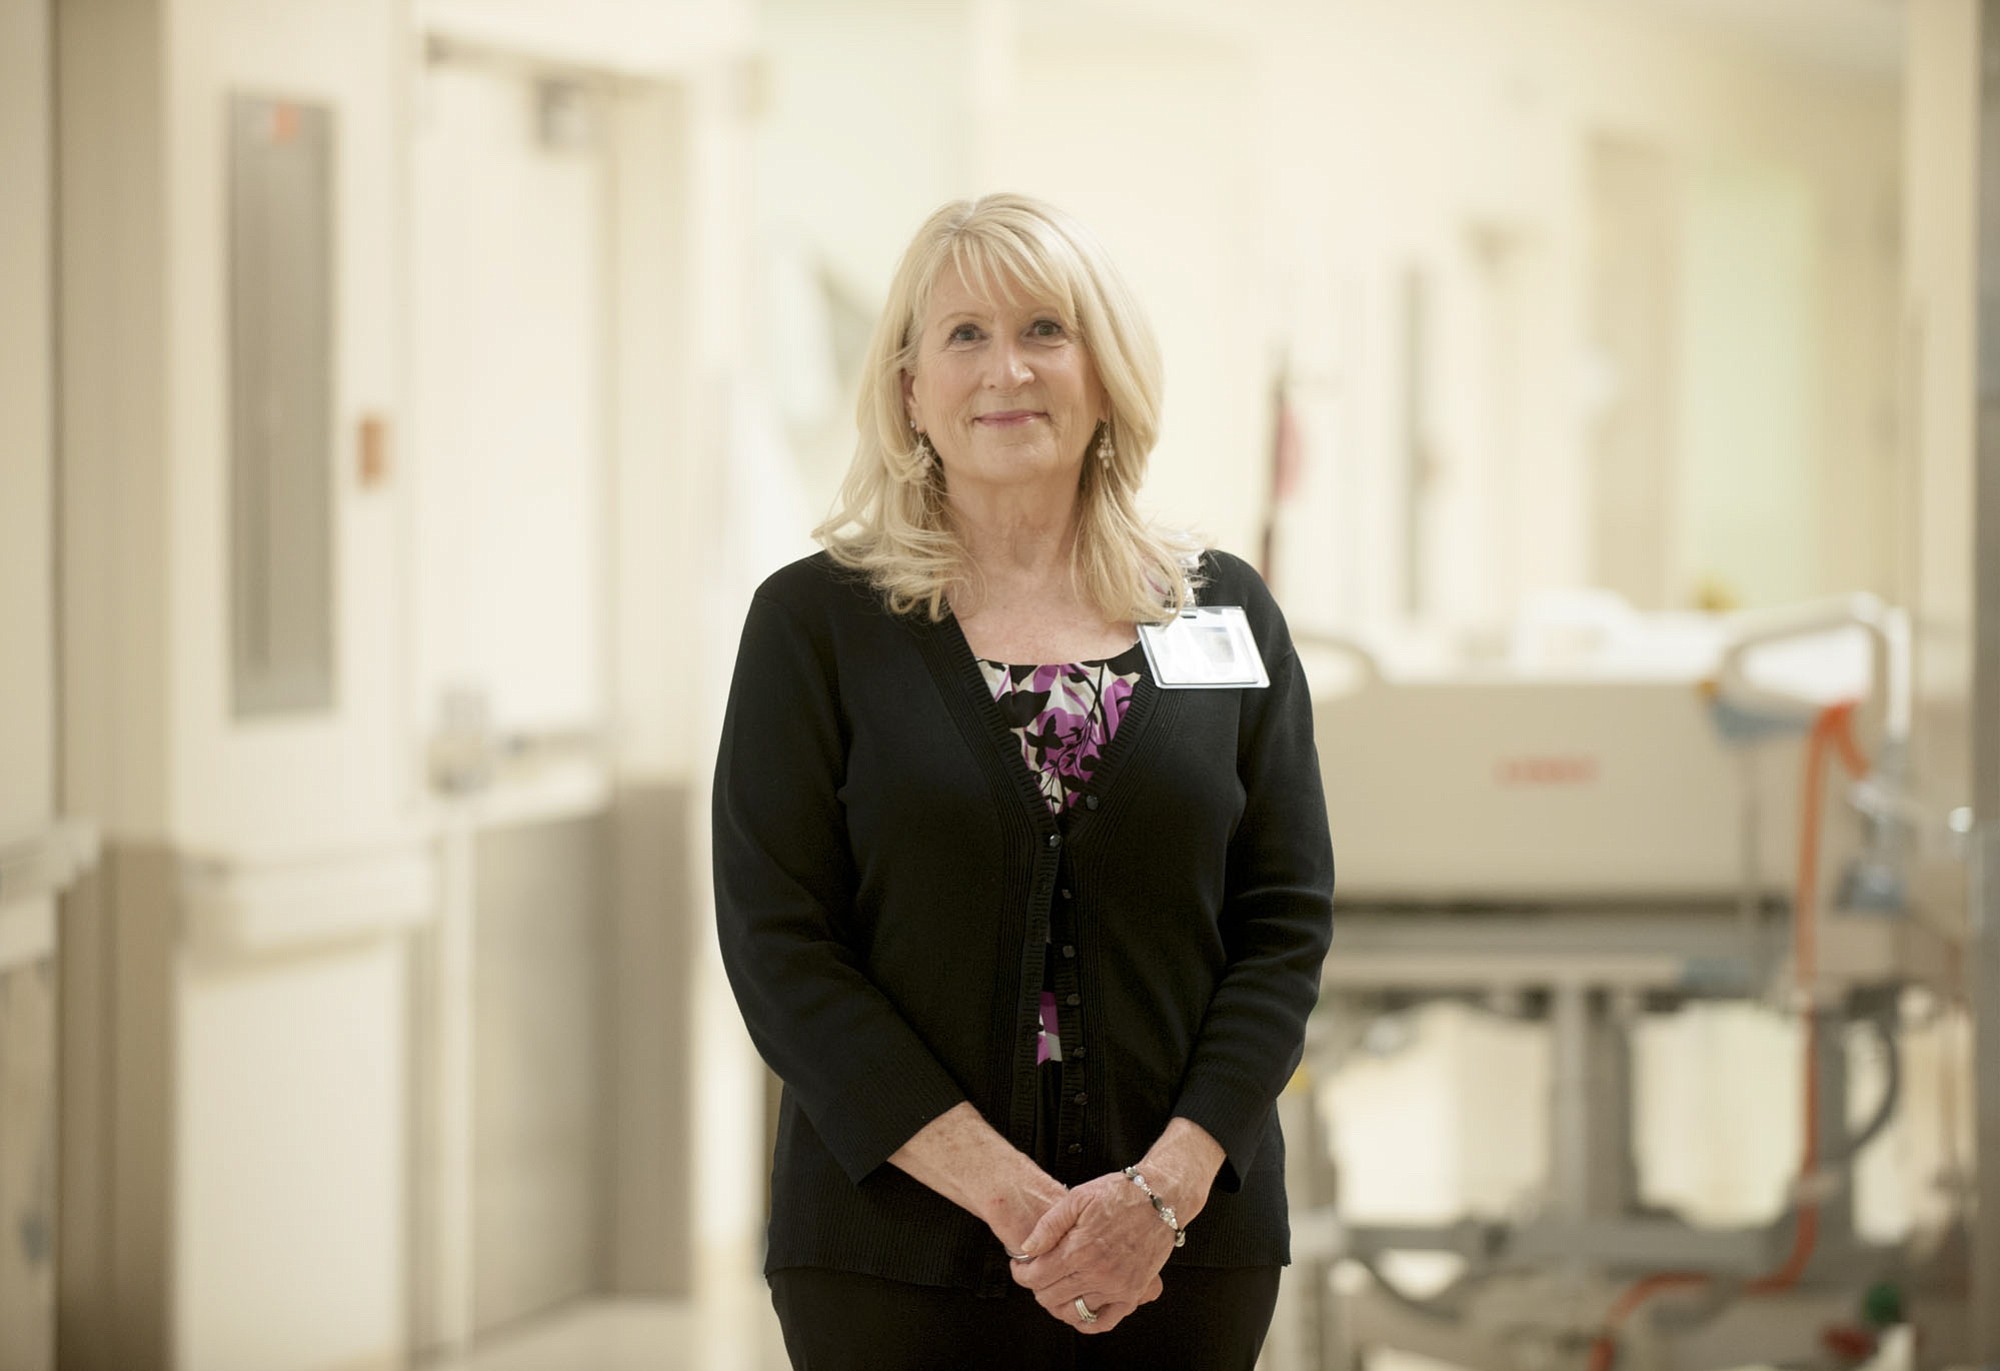 Rhonda Turner, the director of surgical and interventional services at Legacy Salmon Creek Medical Center in Vancouver, will step down after 10 years on the hospital's leadership team. Turner, 63, is retiring Aug.